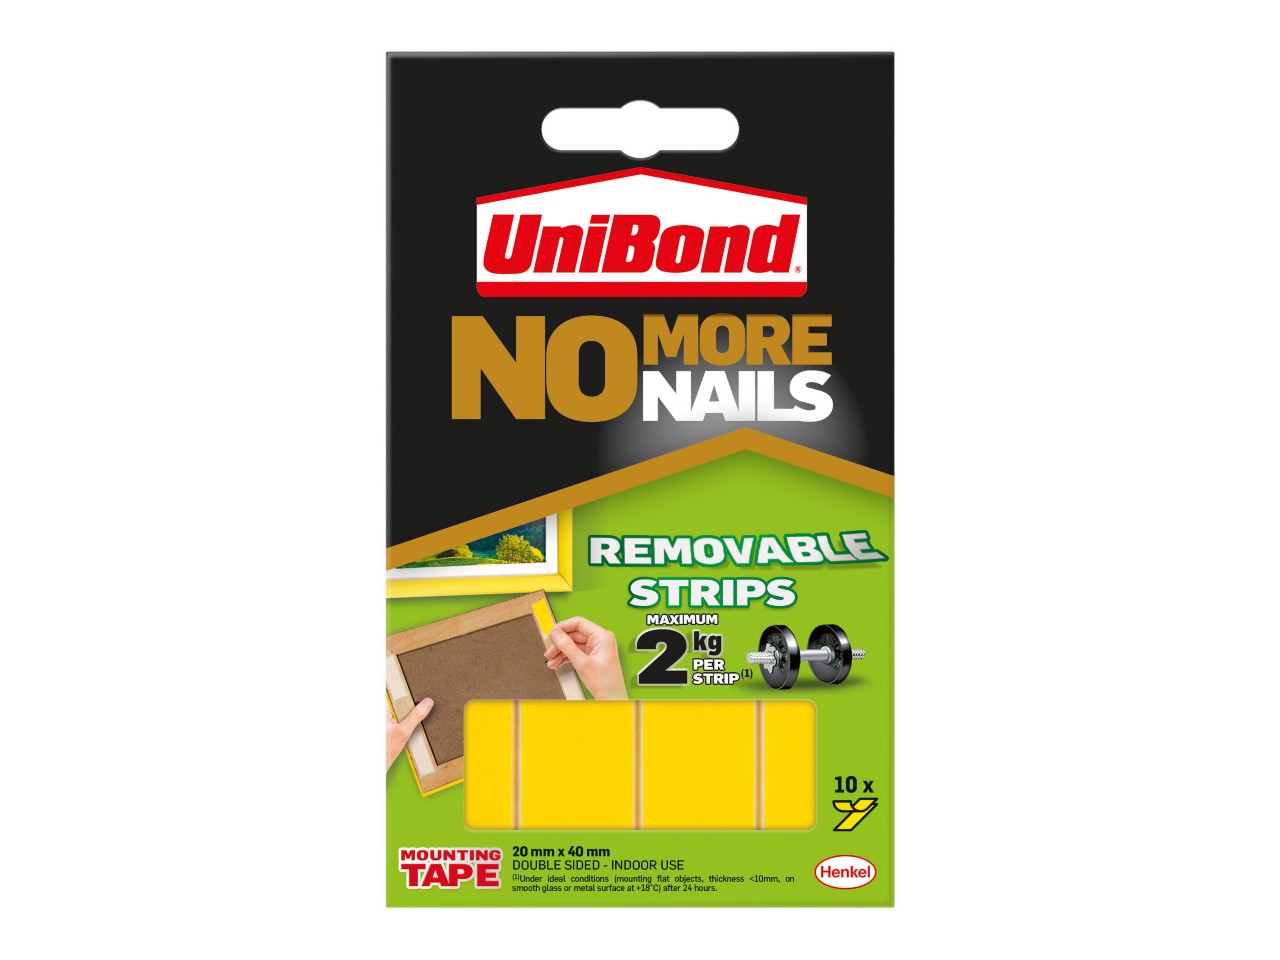 UniBond No More Nails Removable Strips Pack of 10 NEW & SEALED 